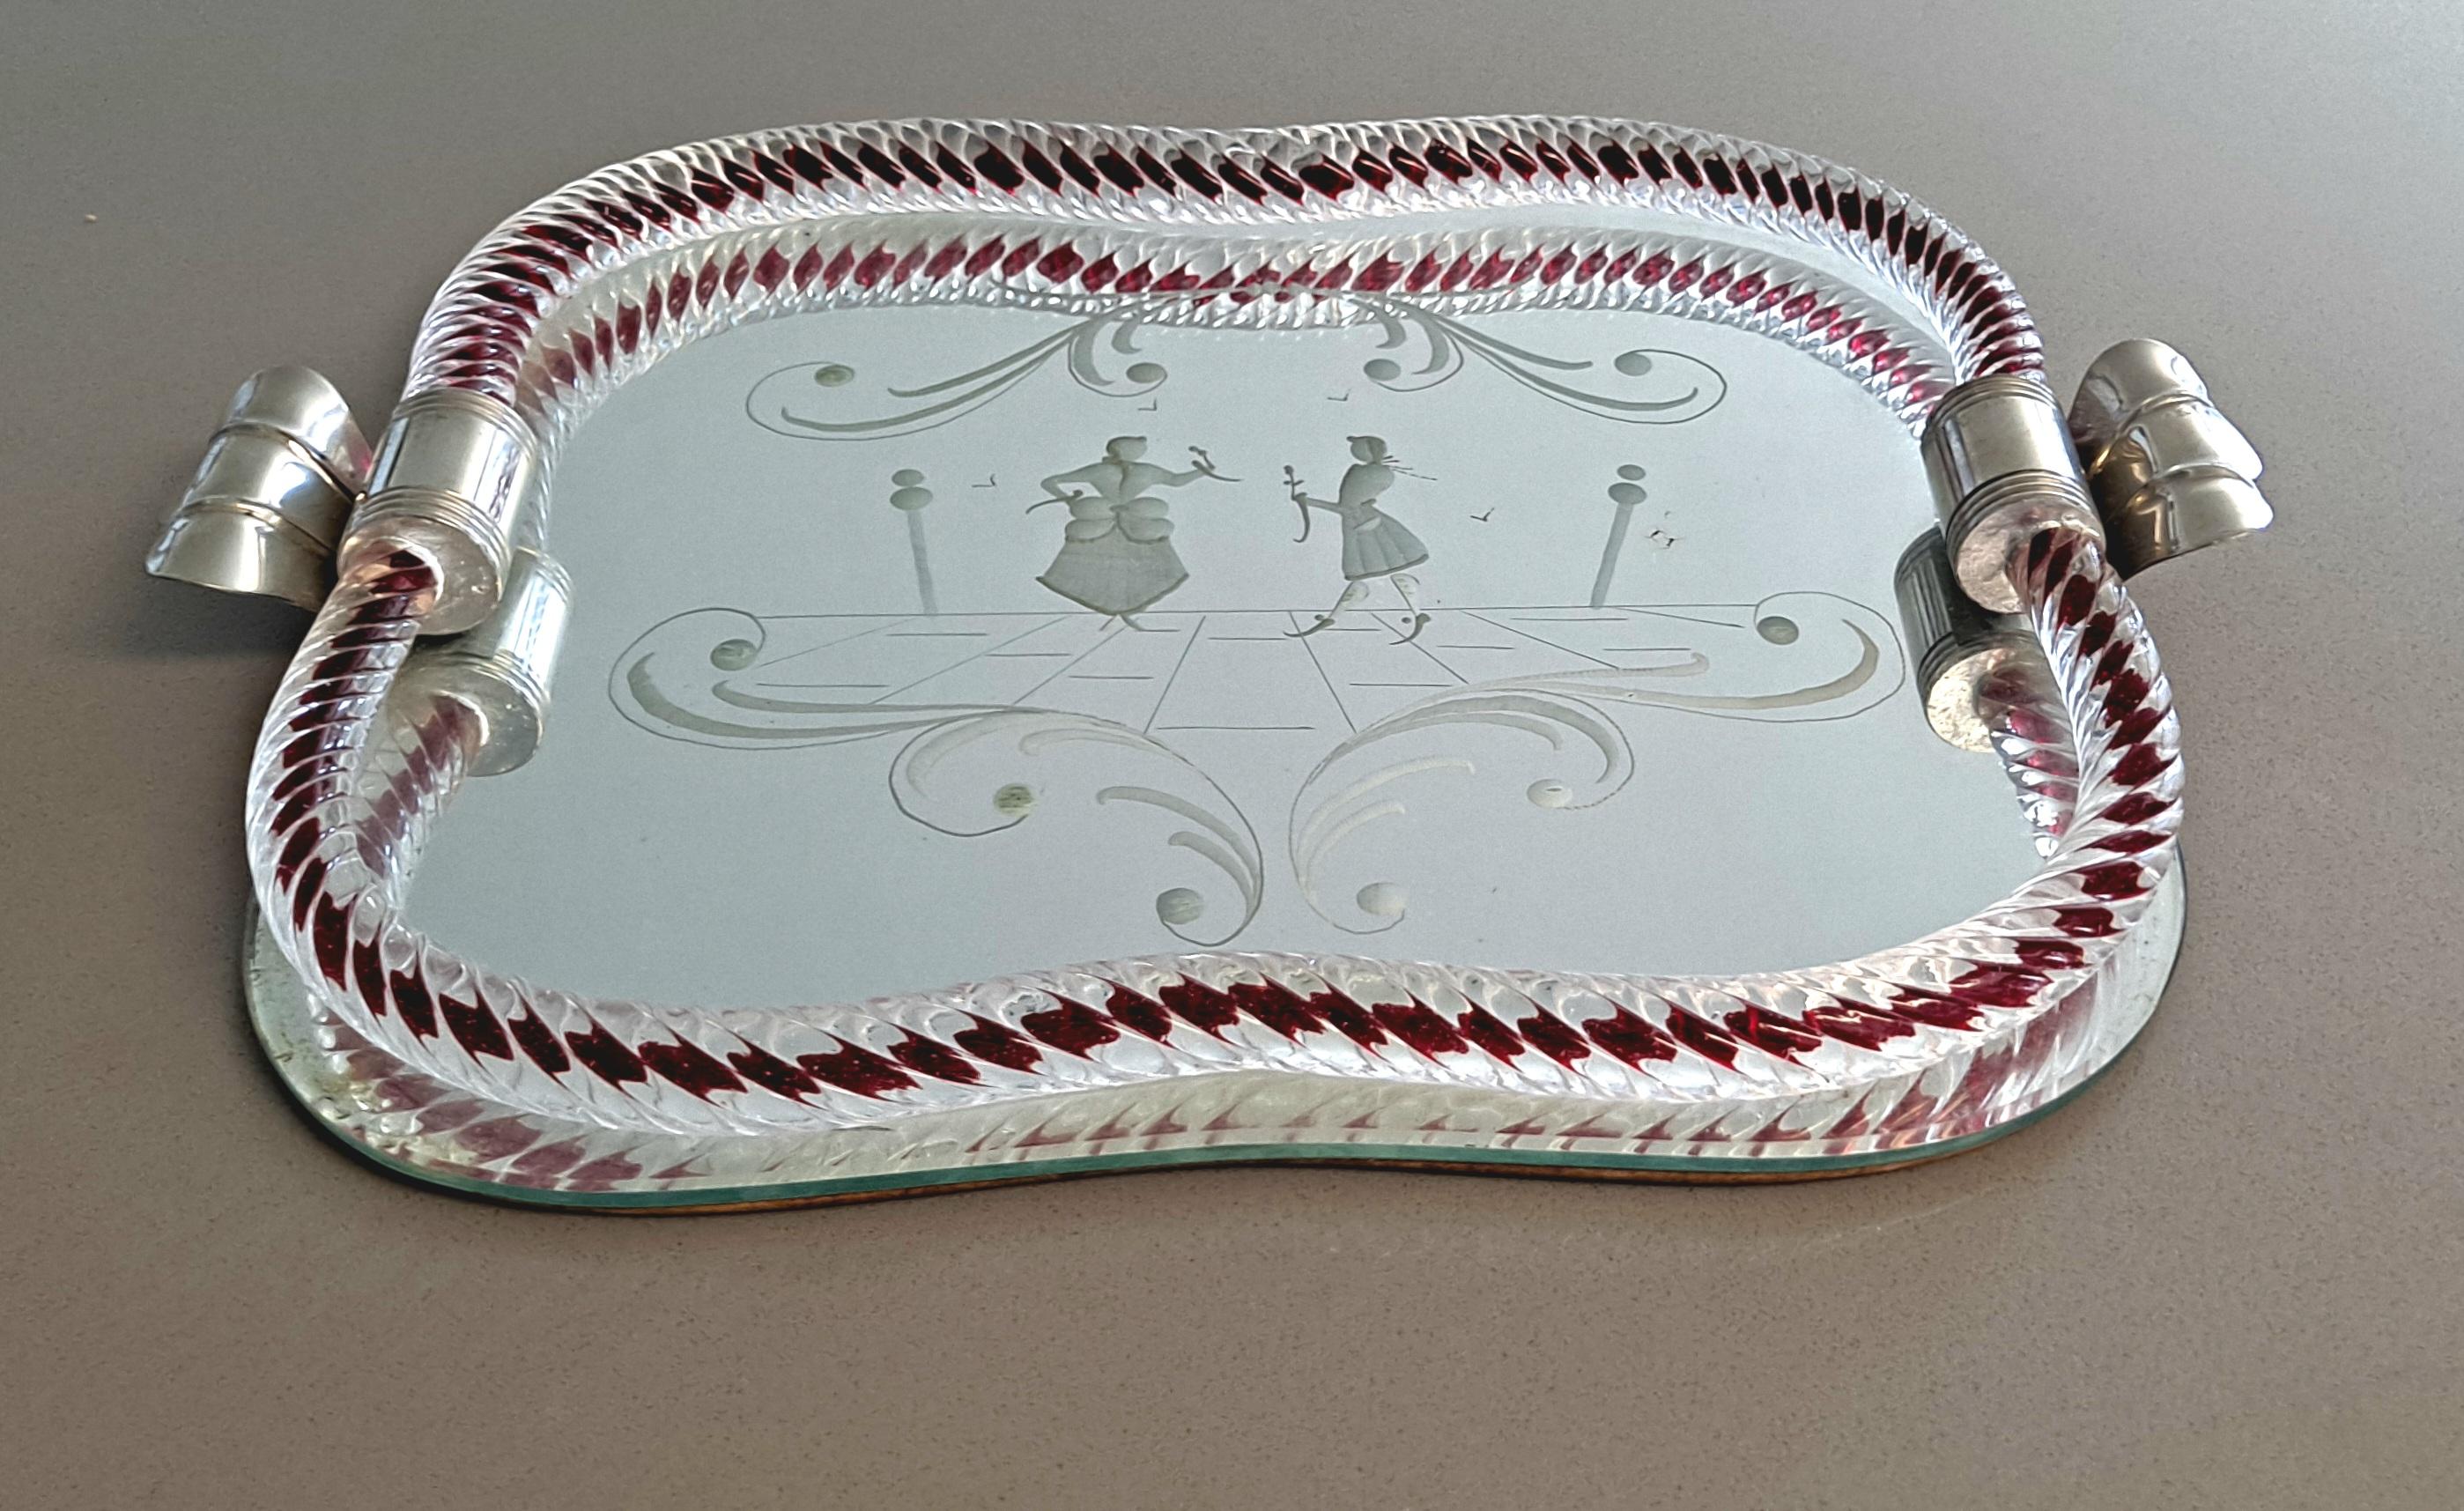 Neoclassical Revival Ercole Barovier  Venation Serving Tray  For Sale